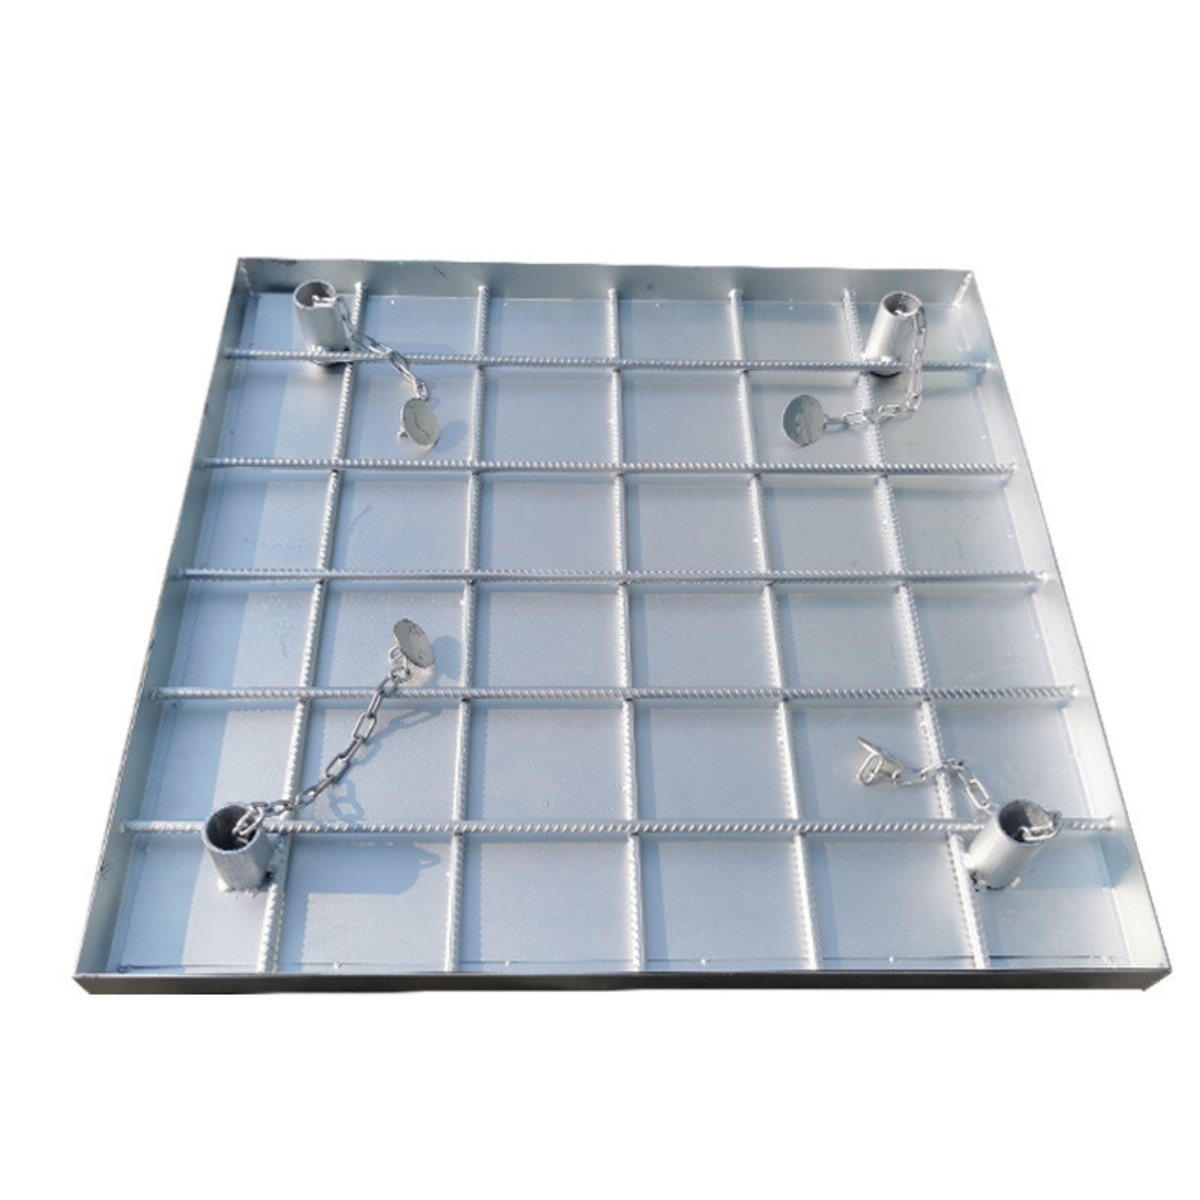 Stainless steel invisible drainage linear manhole cover